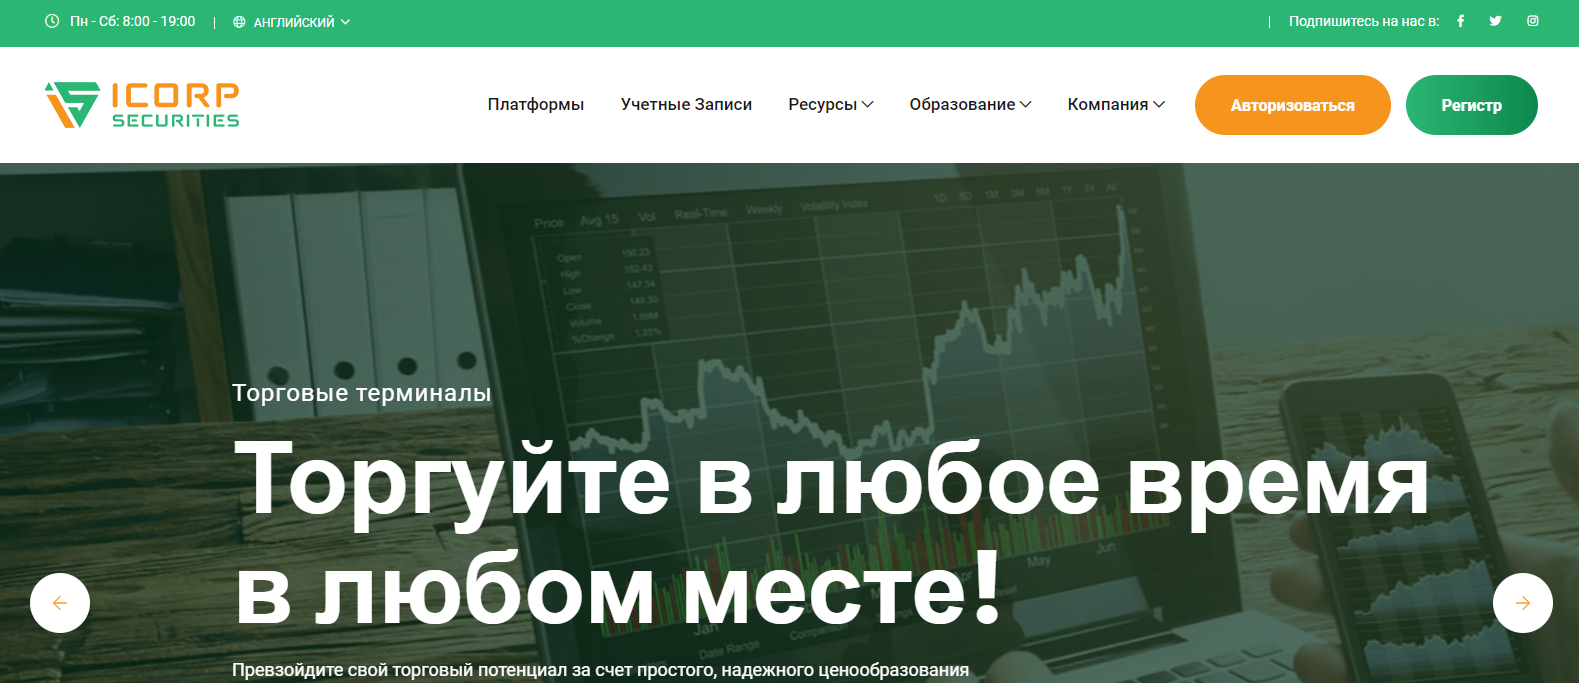 ICorp Securities Главная страница